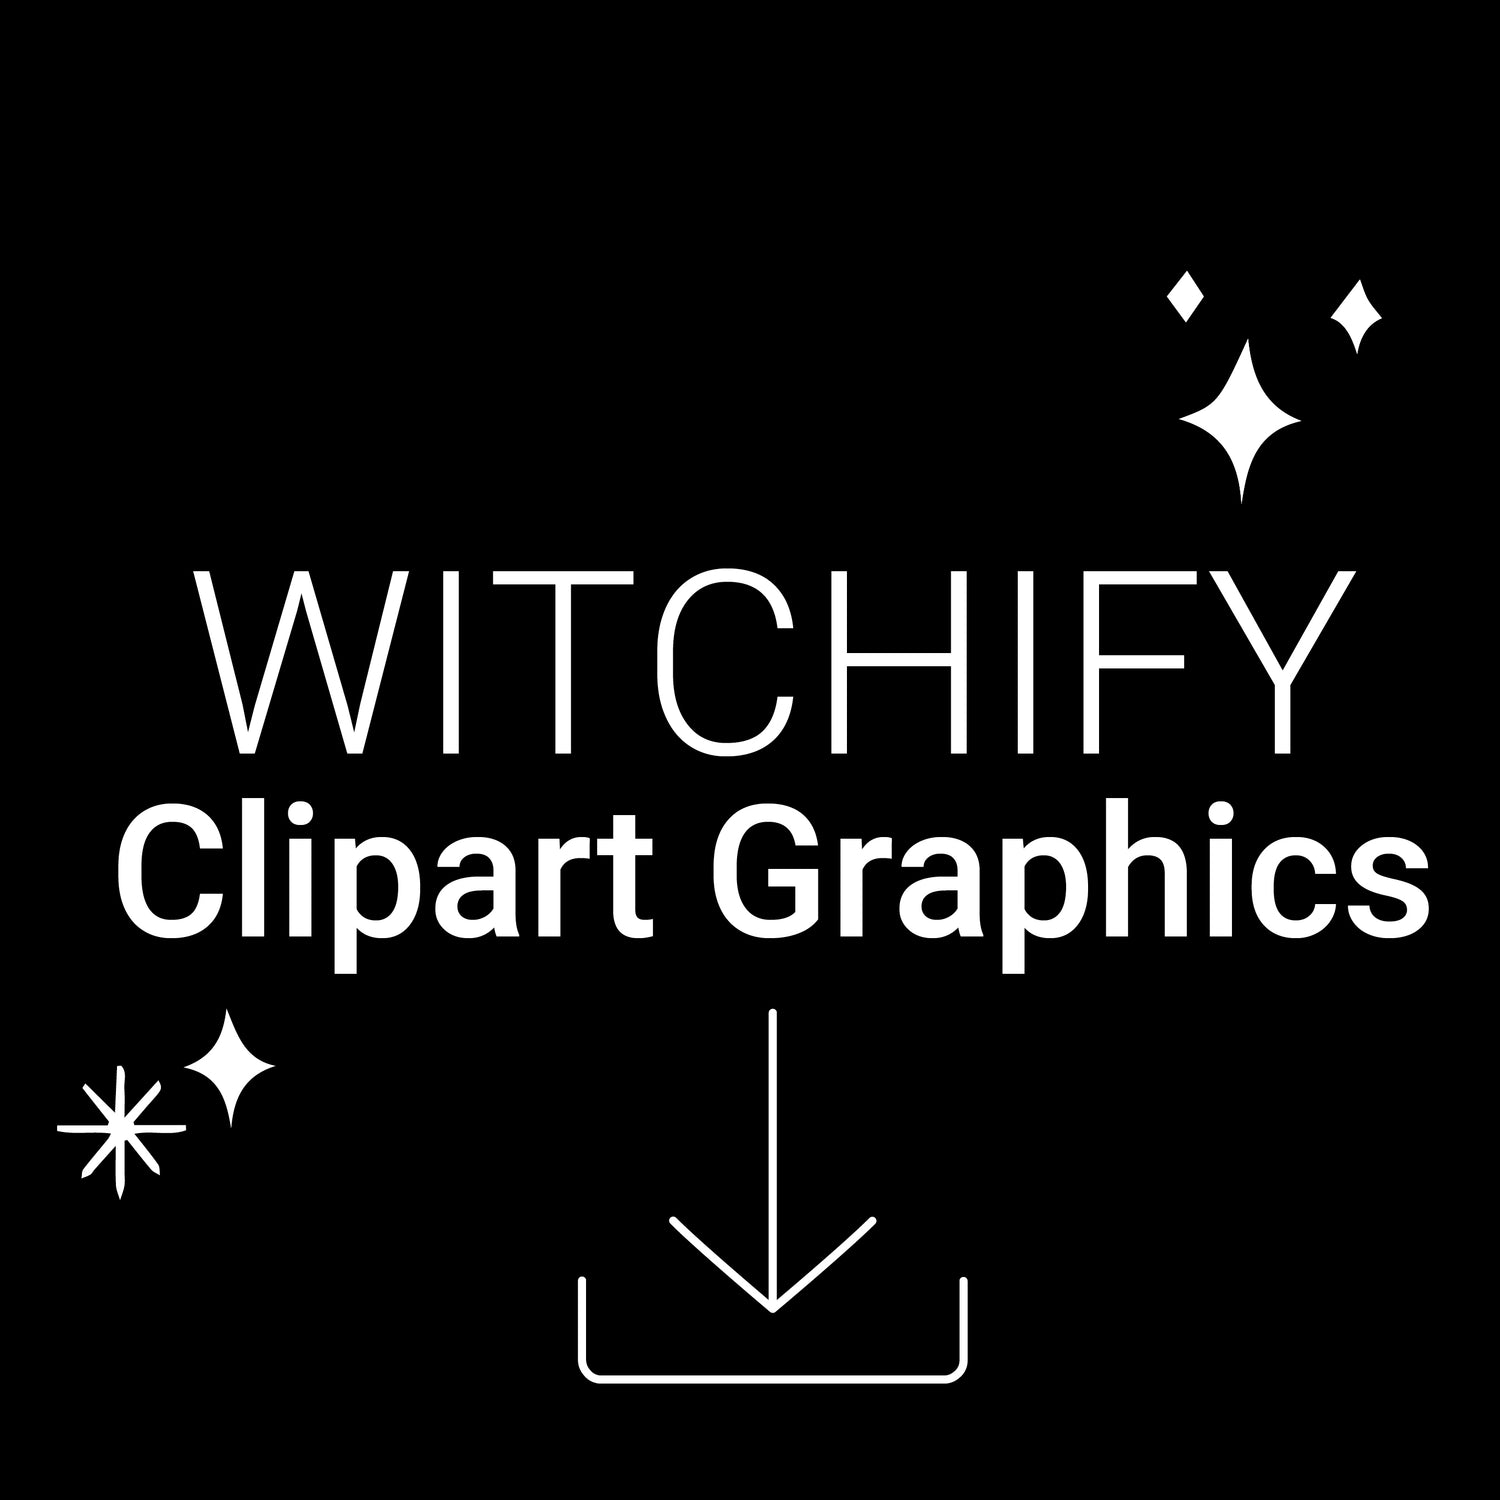 Witchify Witch themed images; Clip Art Illustrations & Graphics